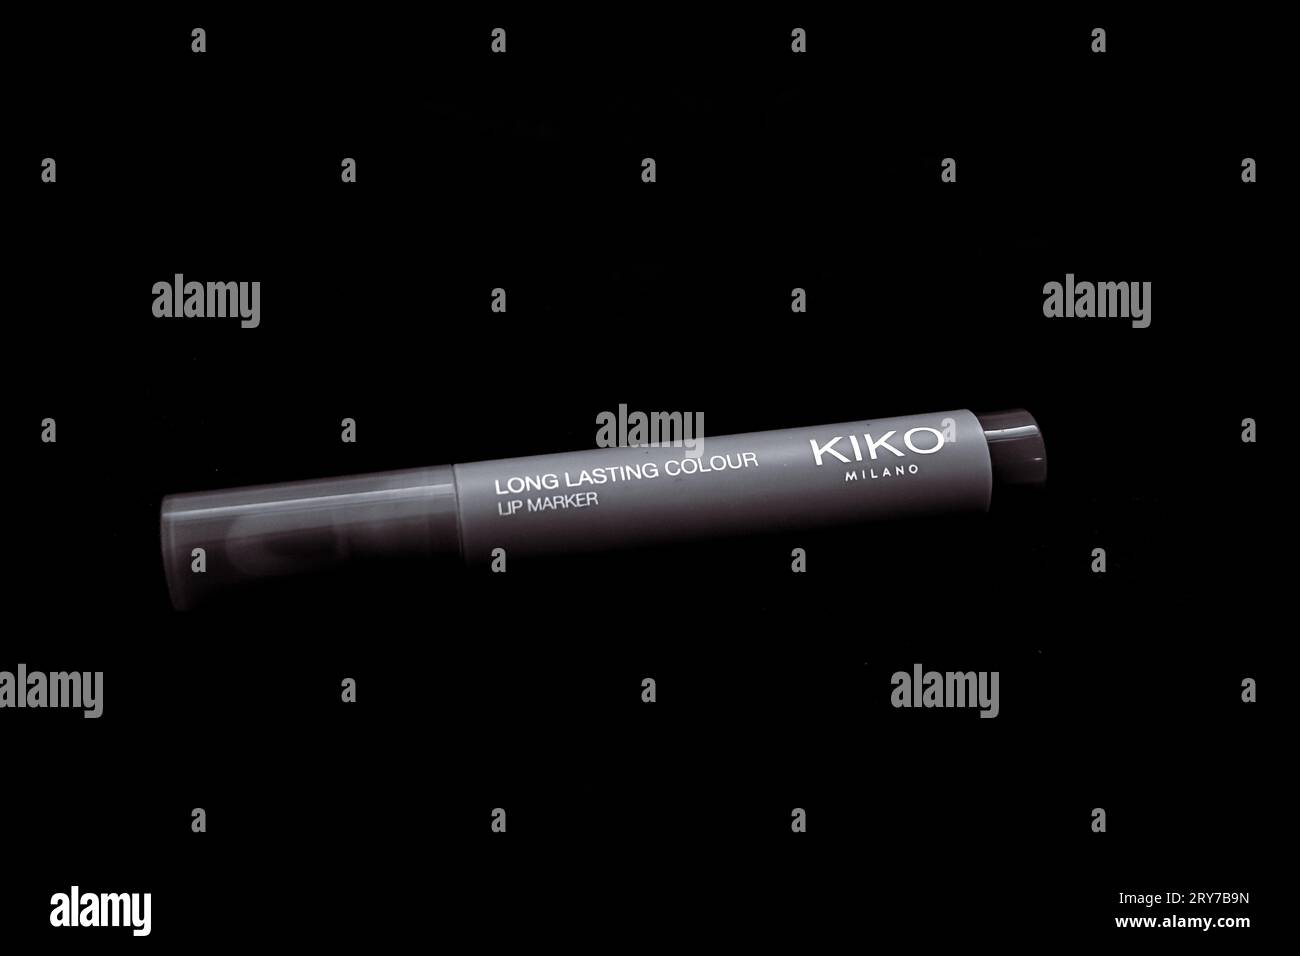 Black and white Long Lasting Colour Lip Marker by Kiko Milano, an Italian professional cosmetics brand isolated on black background Stock Photo